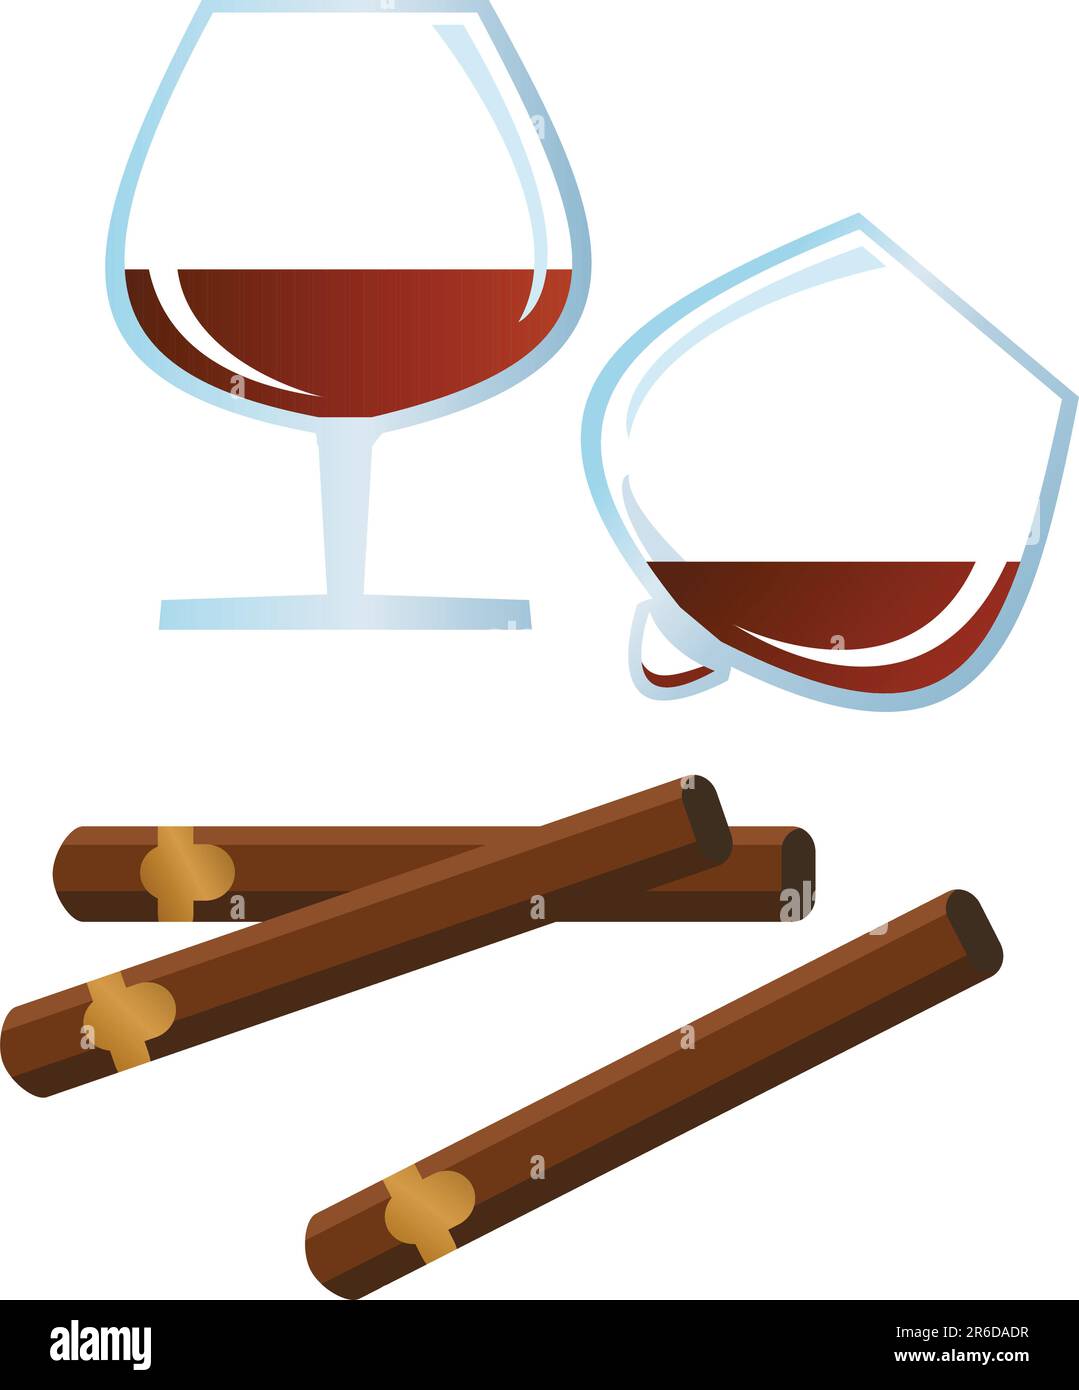 Clip-arts of spirits and cigars on white background Stock Vector